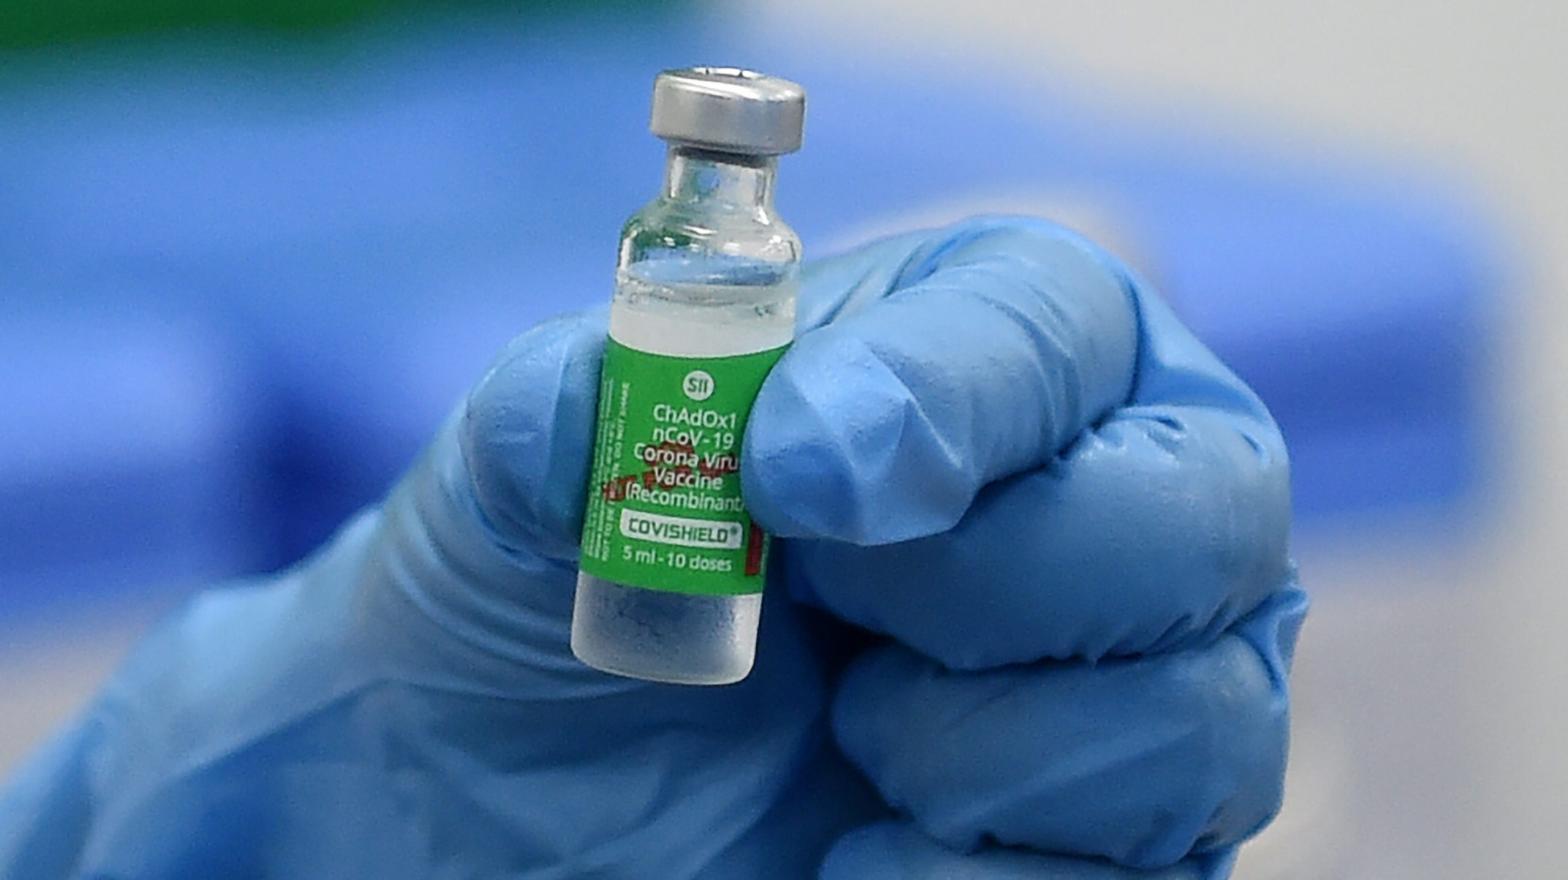 A vial of Covishield, the name given to AstraZeneca/Oxford University's covid-19 vaccine in India (Photo: Punit Paranjpe/AFP, Getty Images)